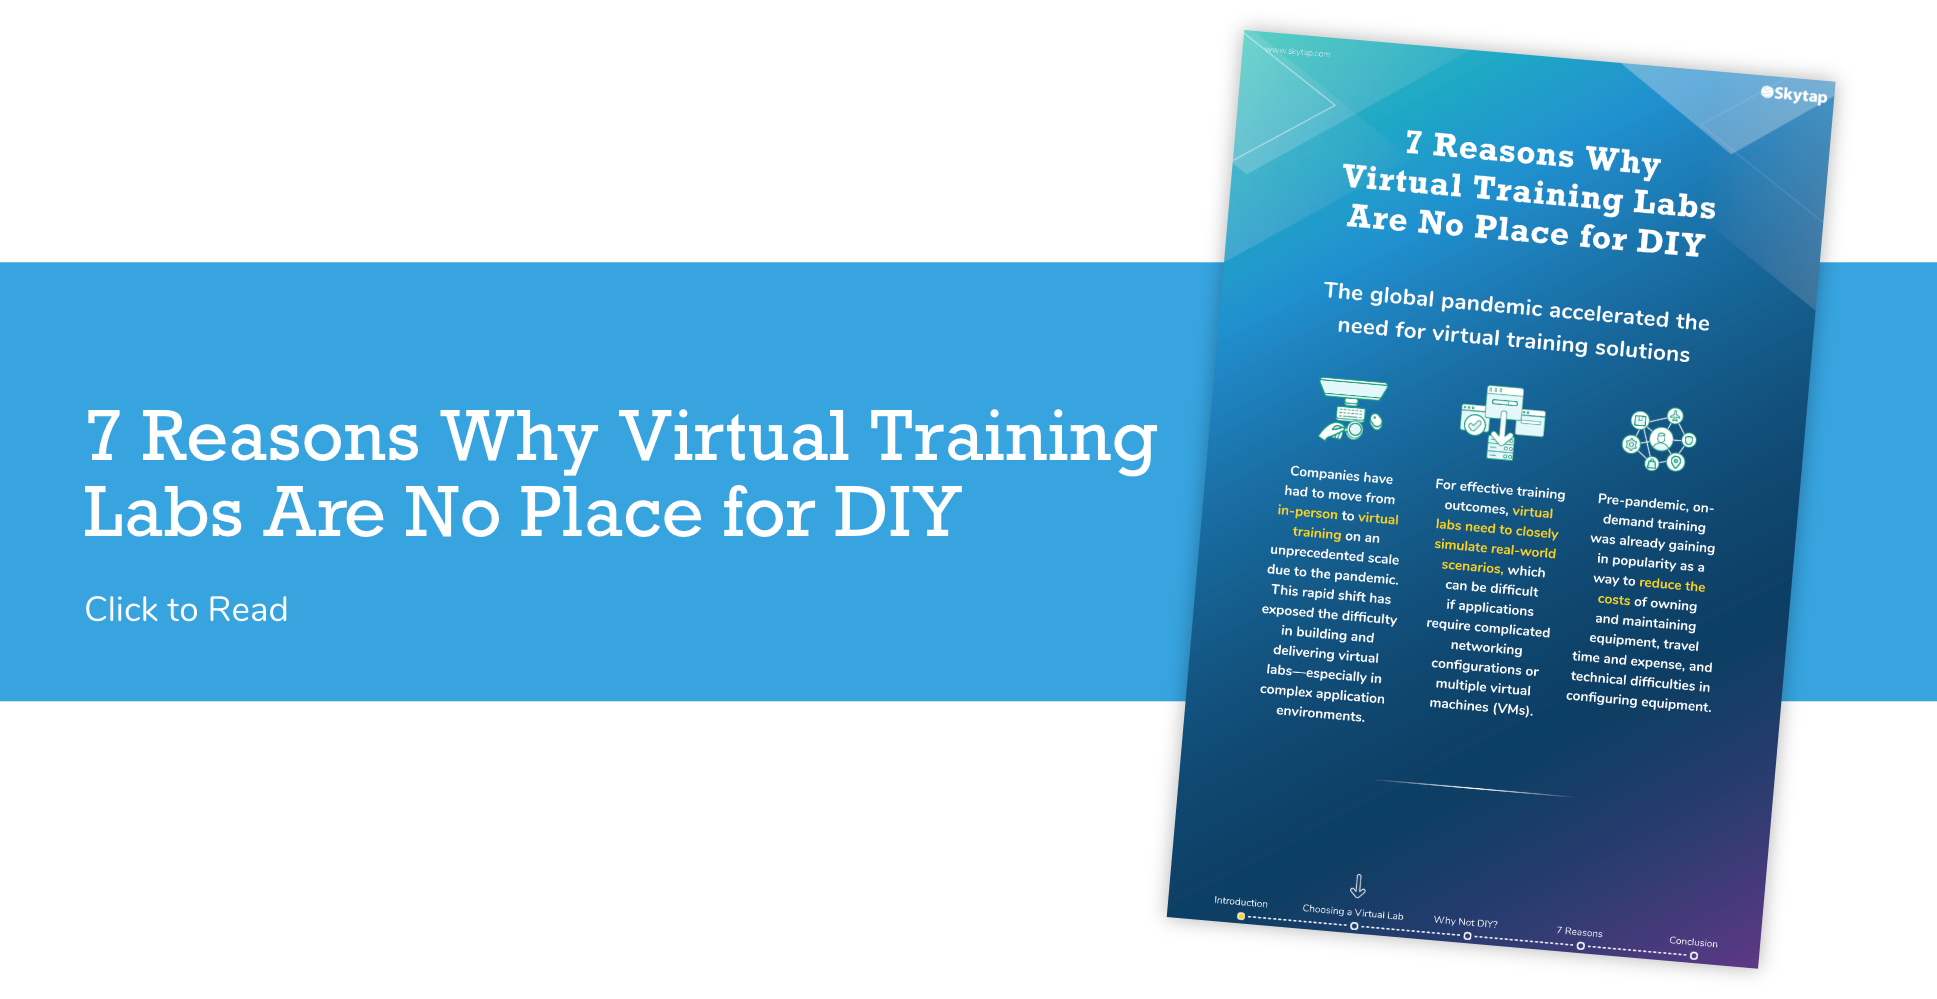 7 Reason Why Virtual Training Labs Are No Place For DIY